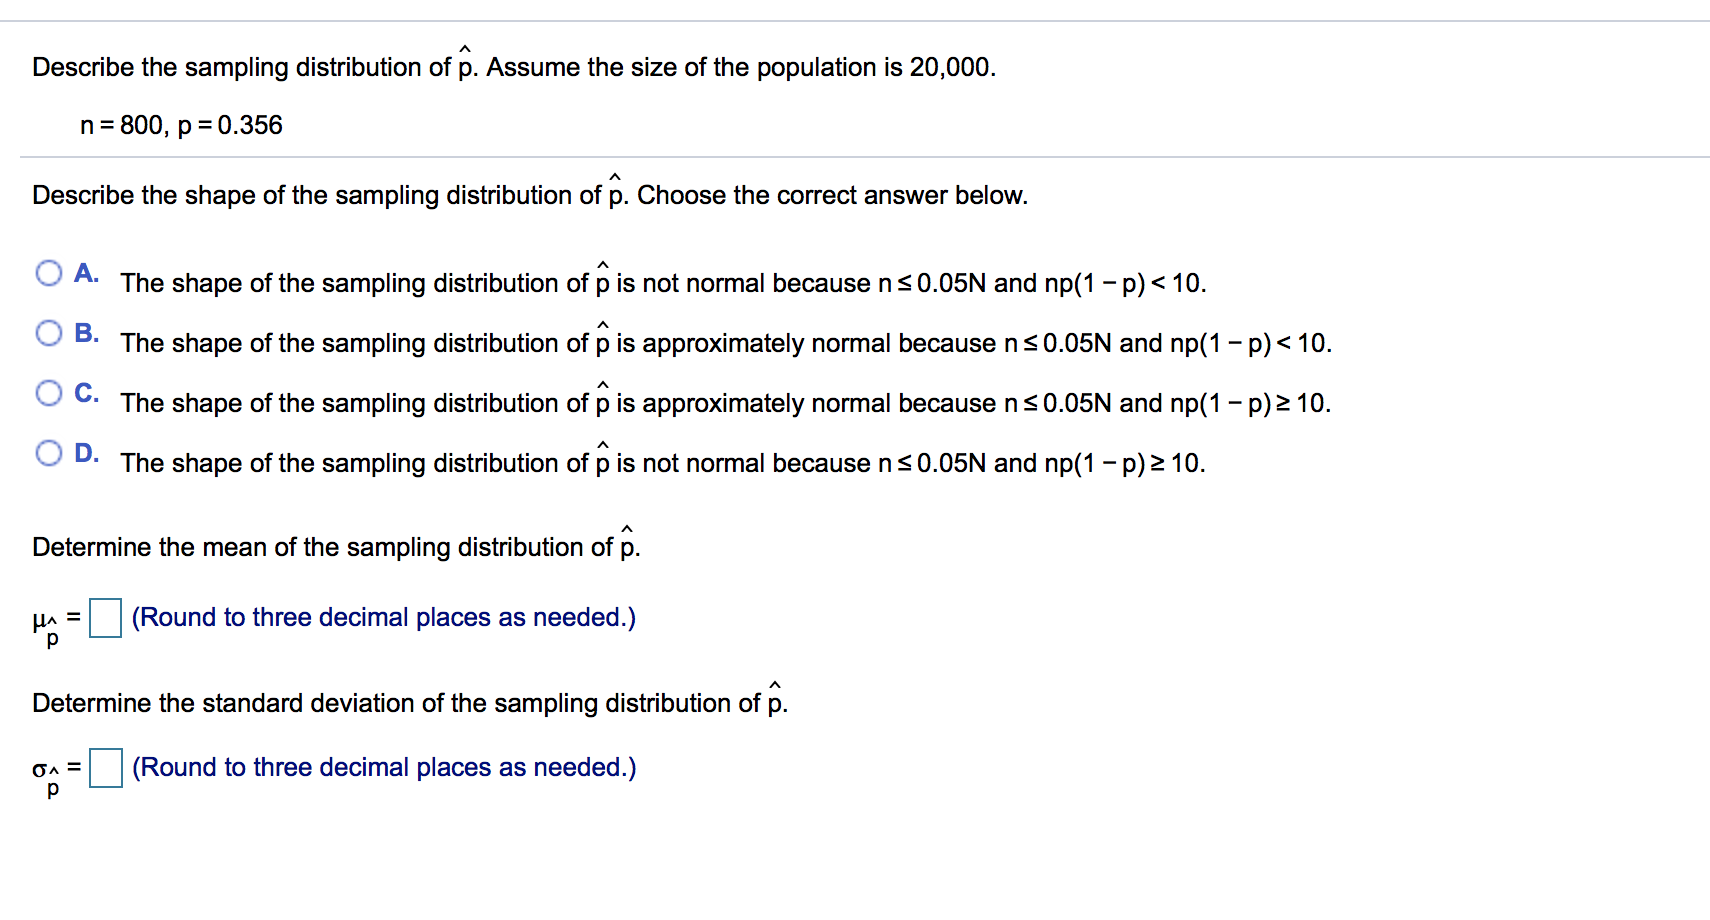 Describe the sampling distribution of p. Assume the size of the population is 20,000.
n 800, p 0.356
Describe the shape of the sampling distribution of p. Choose the correct answer below.
A.
The shape of the sampling distribution of p is not normal because n s 0.05N and np(1 - p)< 10
B.The shape of the sampling distribution of p is approximately normal because ns0.05N and np(1 p) 10
С.
The shape of the sampling distribution of p is approximately normal because n s 0.05N and np(1 -p)2 10.
O D.
ecause ns0.05N and np(1 - p)2 10.
The shape
the sampling distribution of p is not norma
Determine the mean of the sampling distribution of p.
(Round to three decimal places as needed.)
HA
р
Determine the standard deviation of the sampling distribution of p.
(Round to three decimal places as needed.)
р
